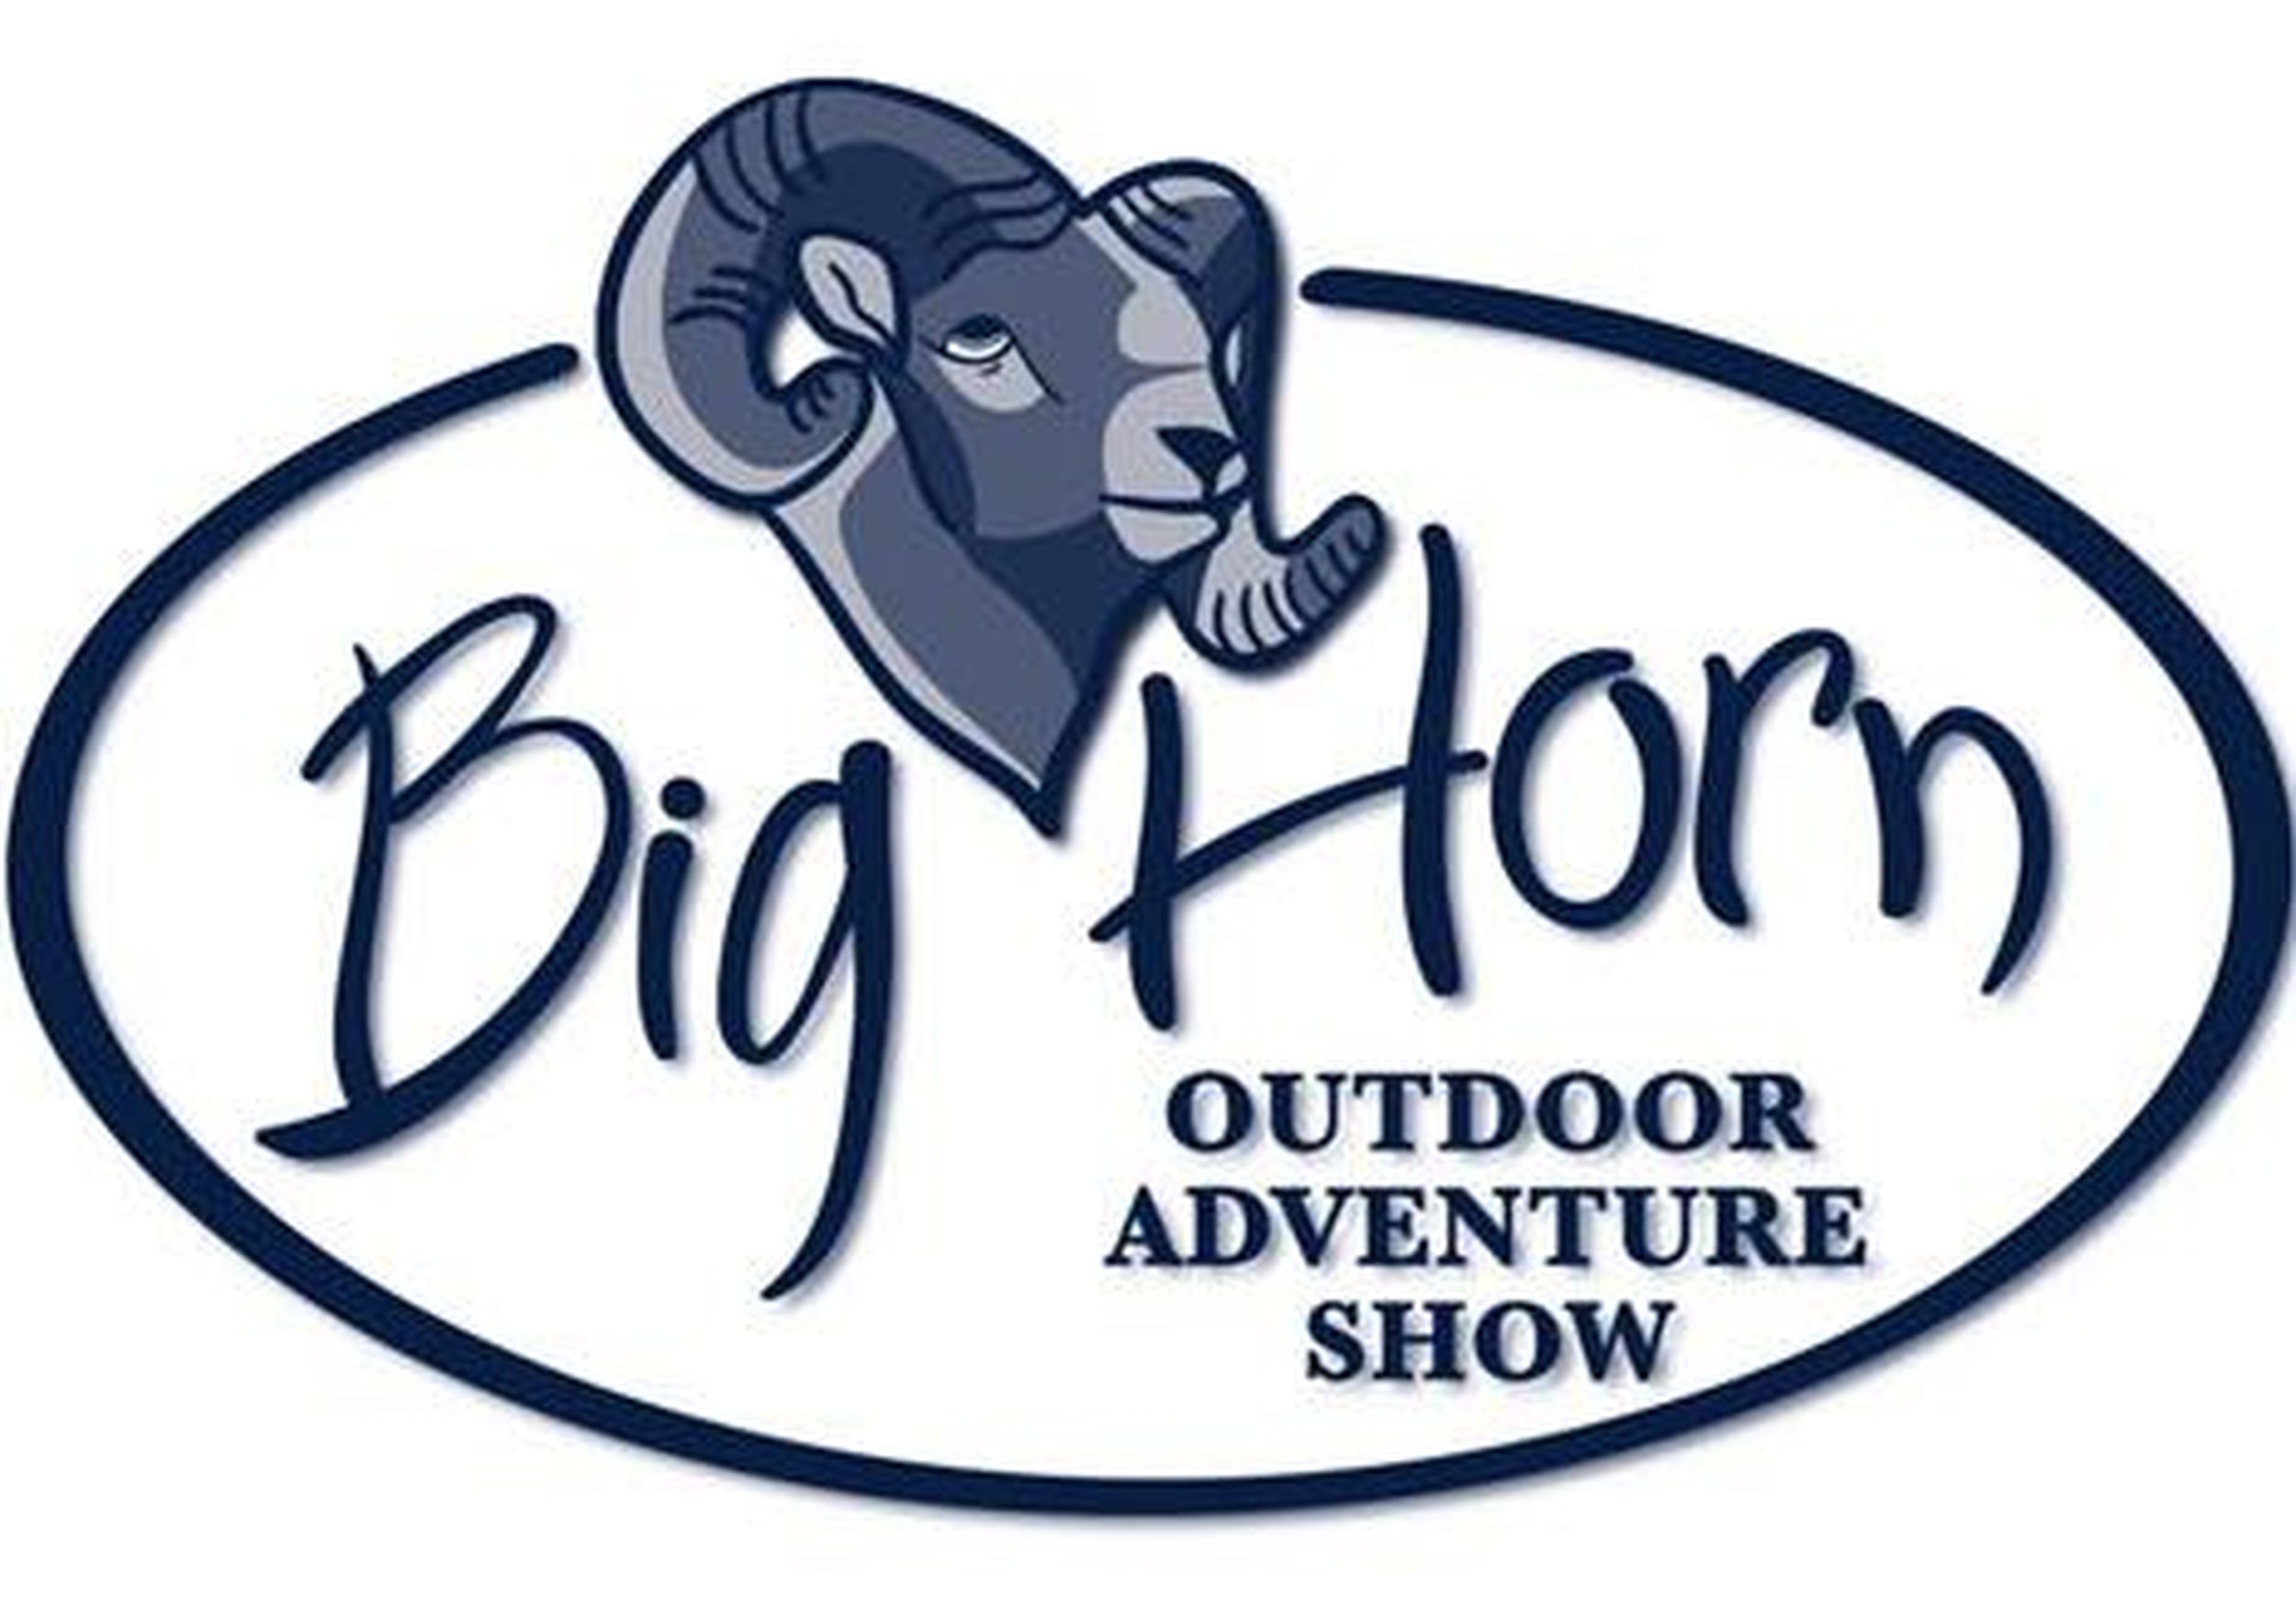 Big Horn Outdoor Adventure Show starts today The SpokesmanReview